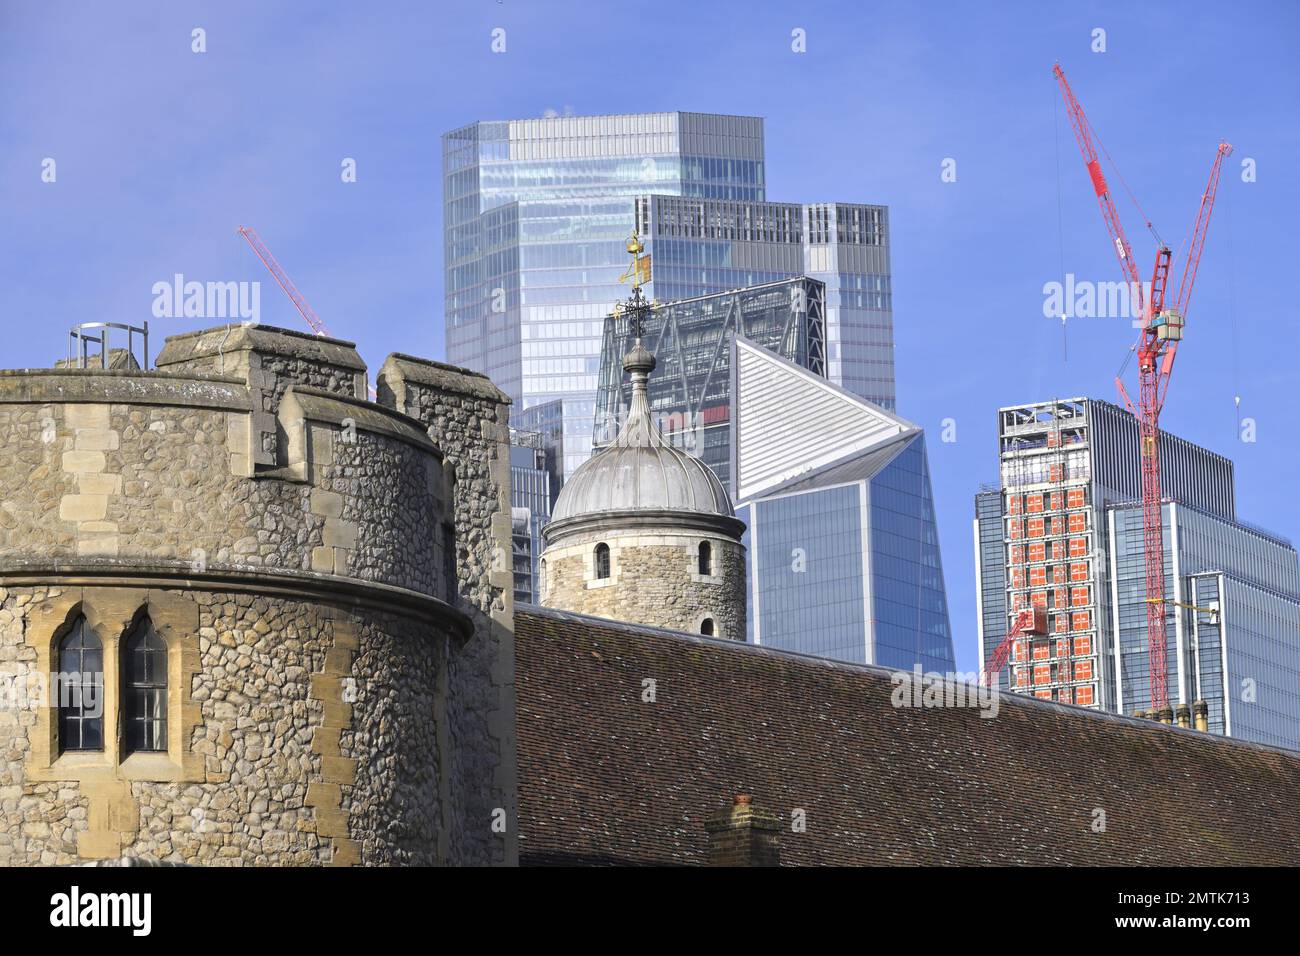 London, England, UK. Old and new architecture. City of London towerblocks behind the Tower of London Stock Photo